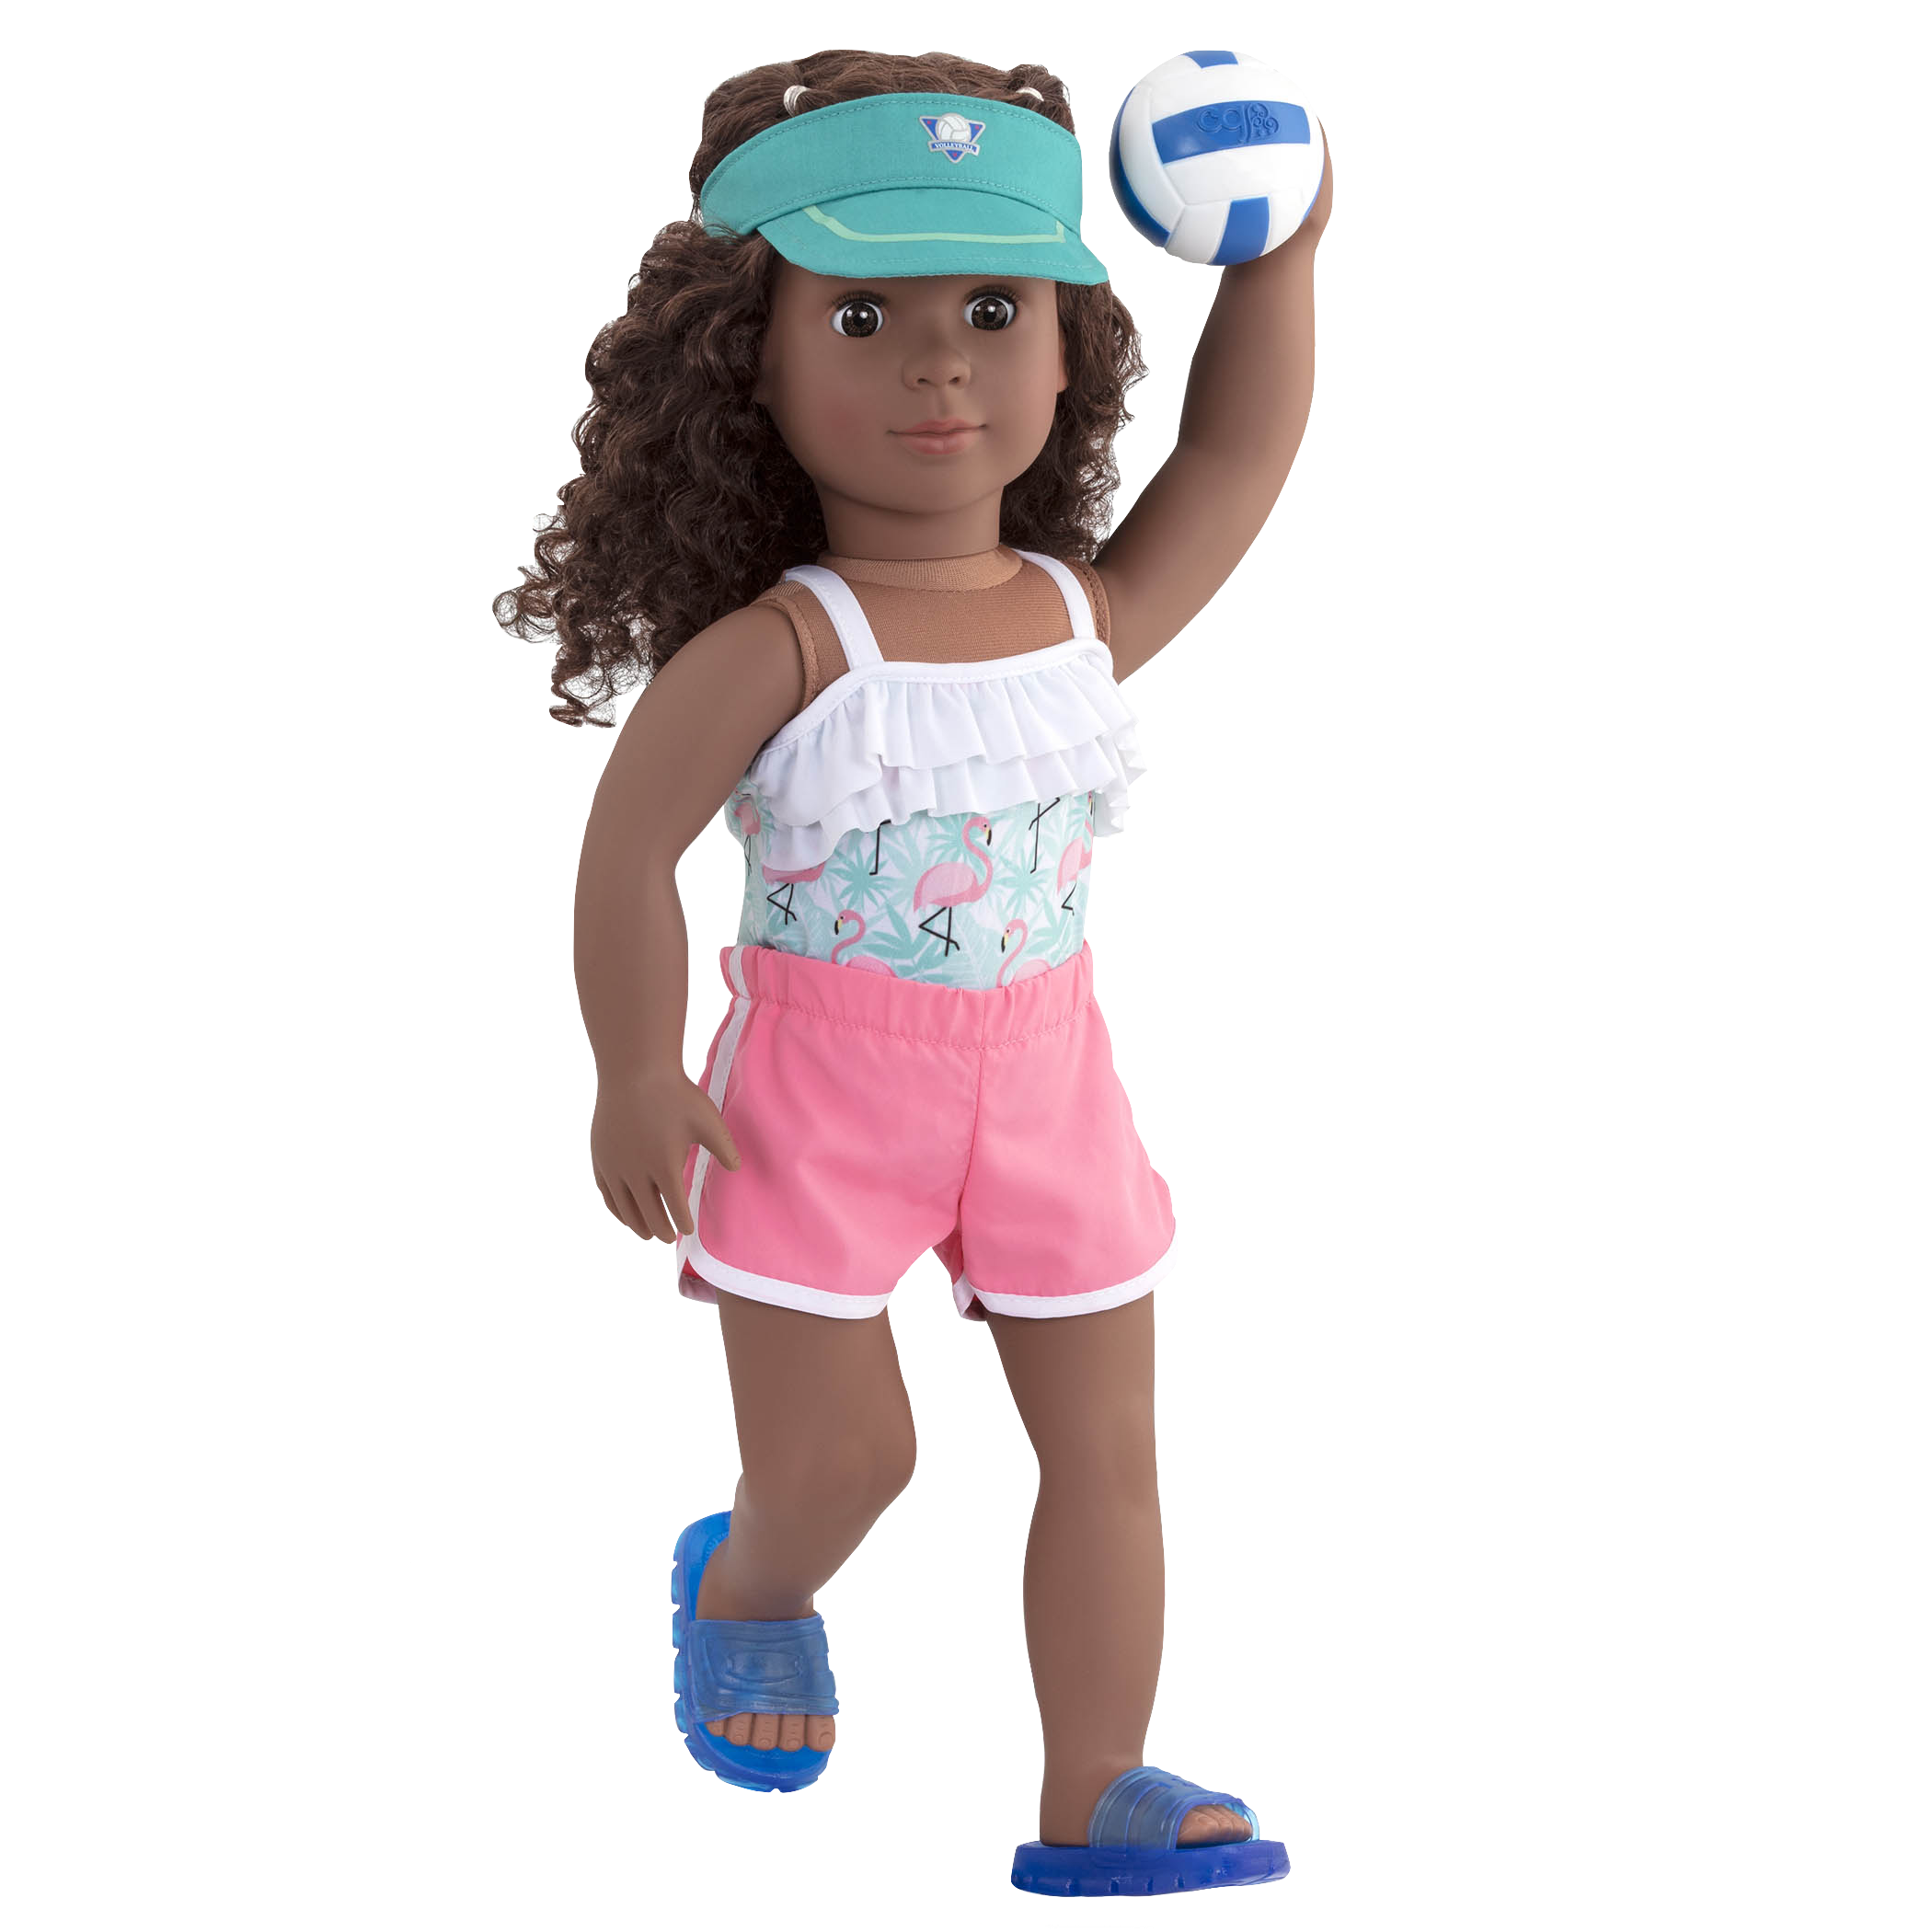 Ace Attire volleyball outfit Dedra raising ball